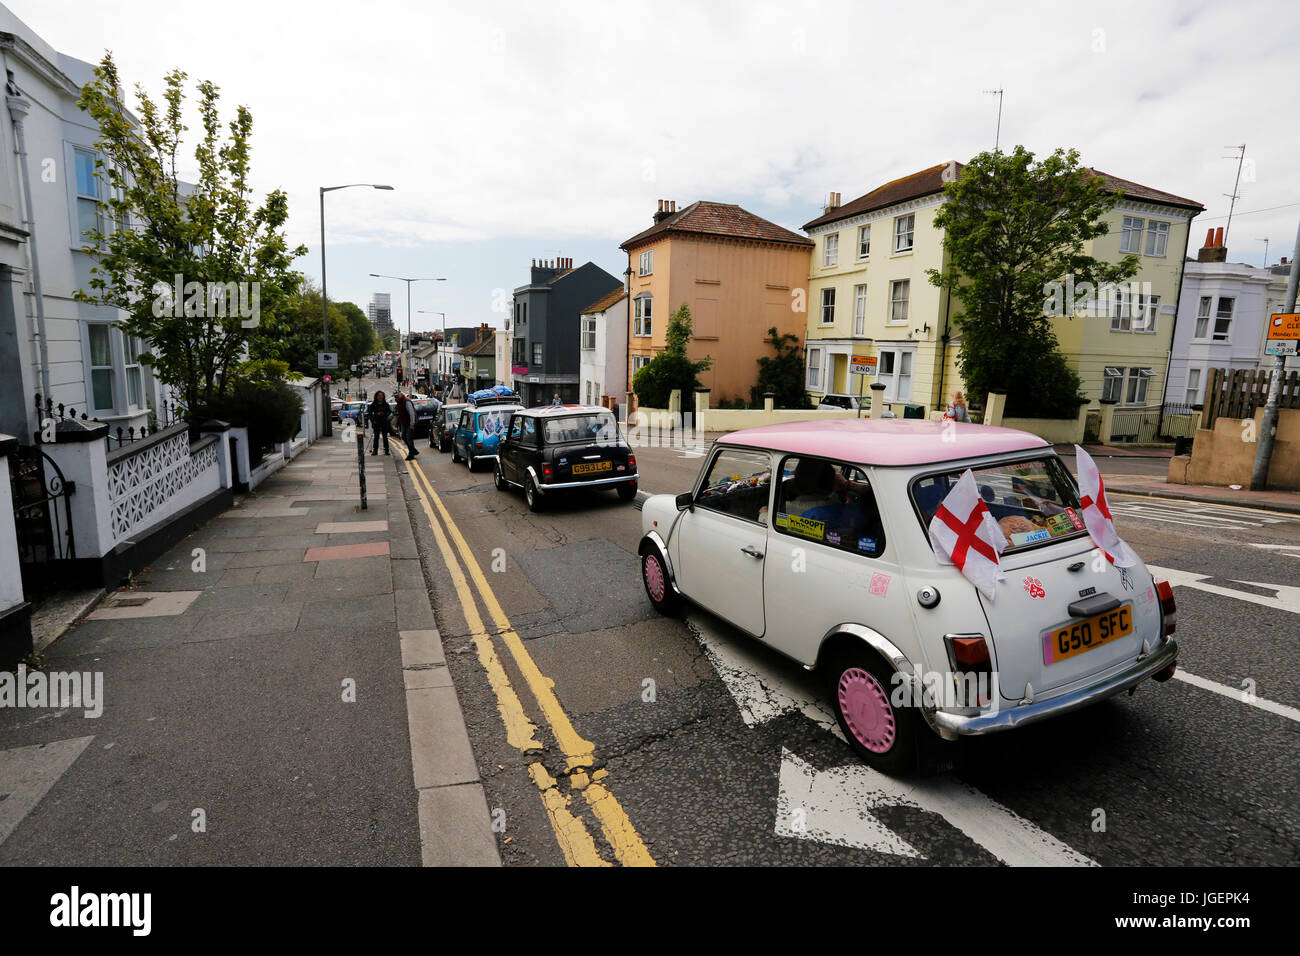 Brighton, UK - May 17, 2015: London to Brighton Mini Car Run. This annual event is organised by the London and Surrey Mini Owners Club. Stock Photo